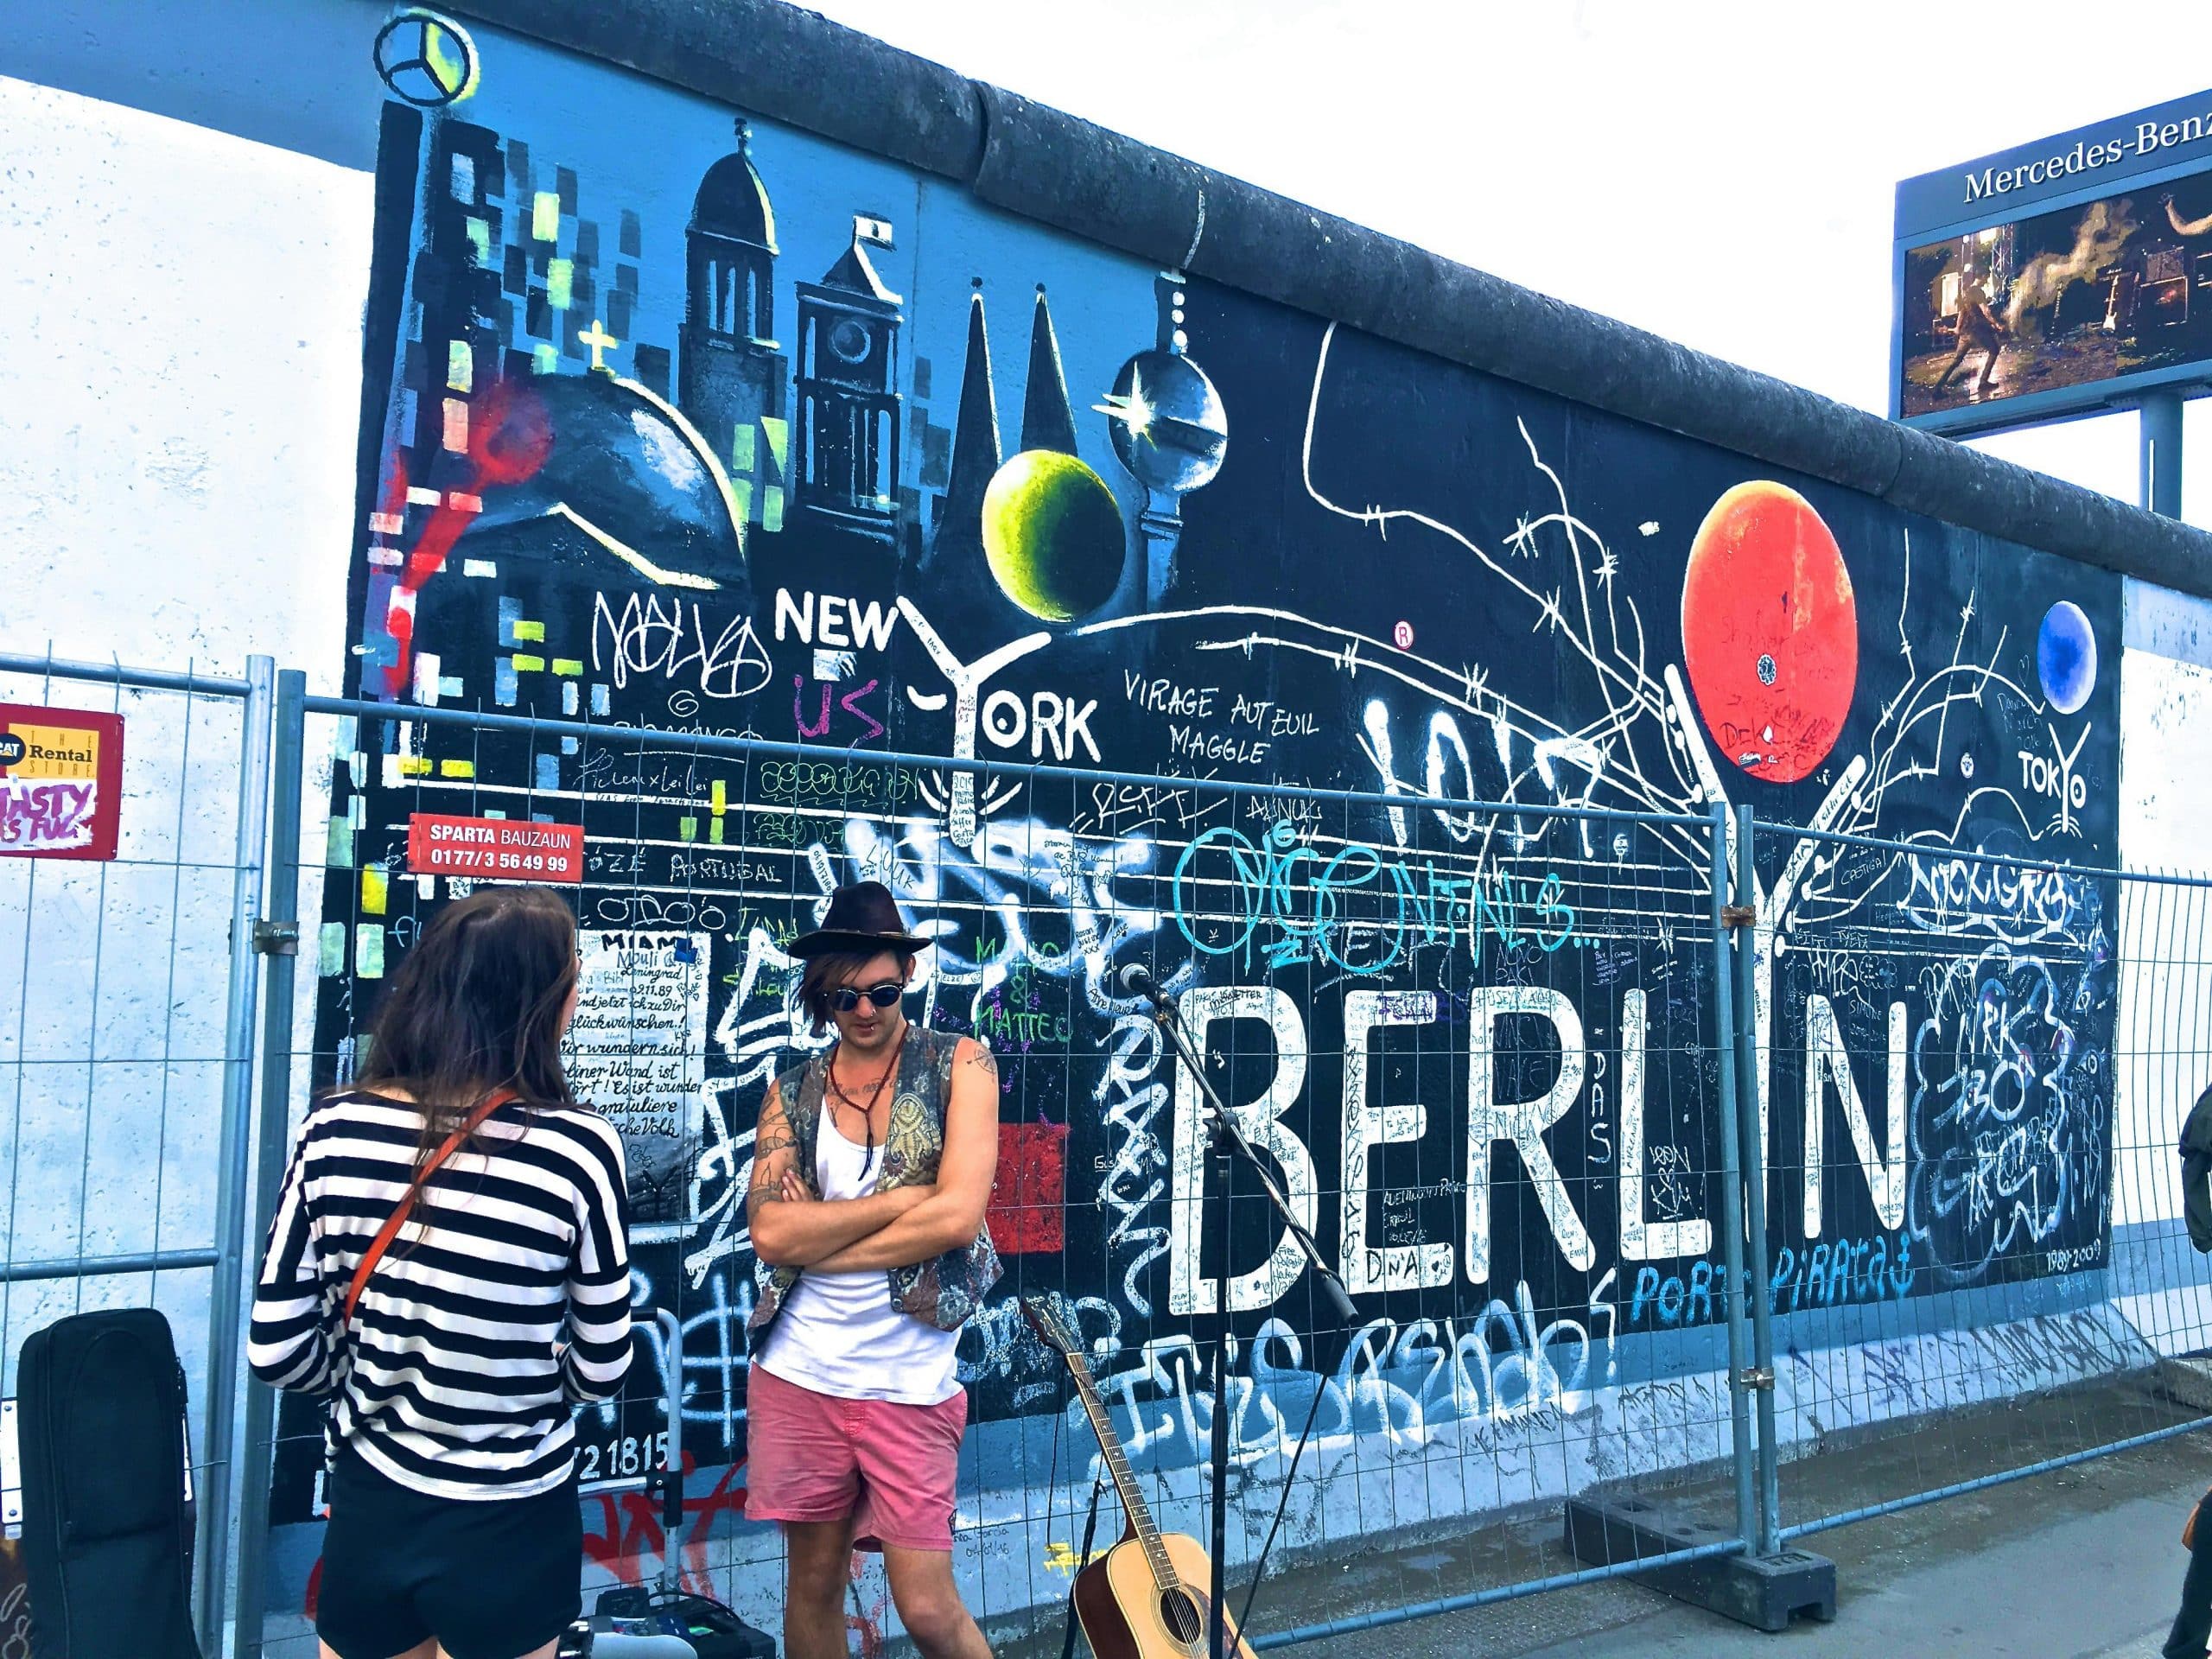 Our Producer’s top filming locations in Berlin